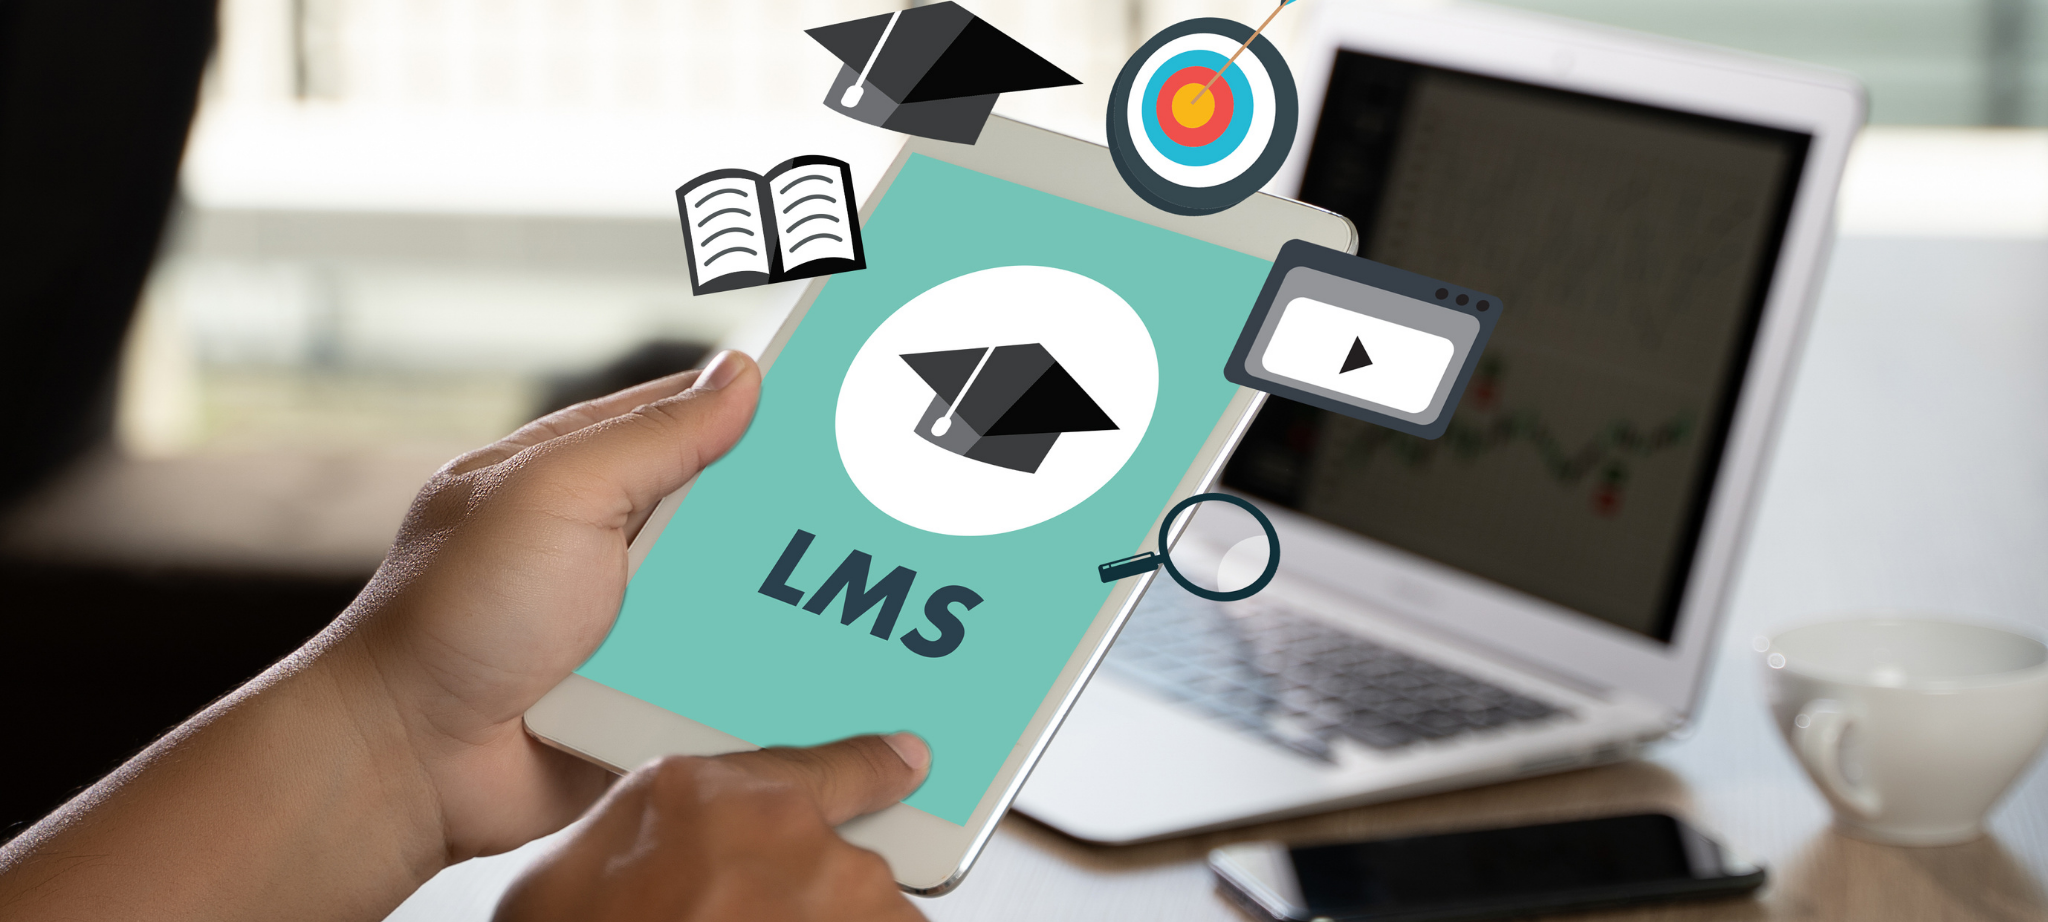 LMS Education: All you need to know about LMS